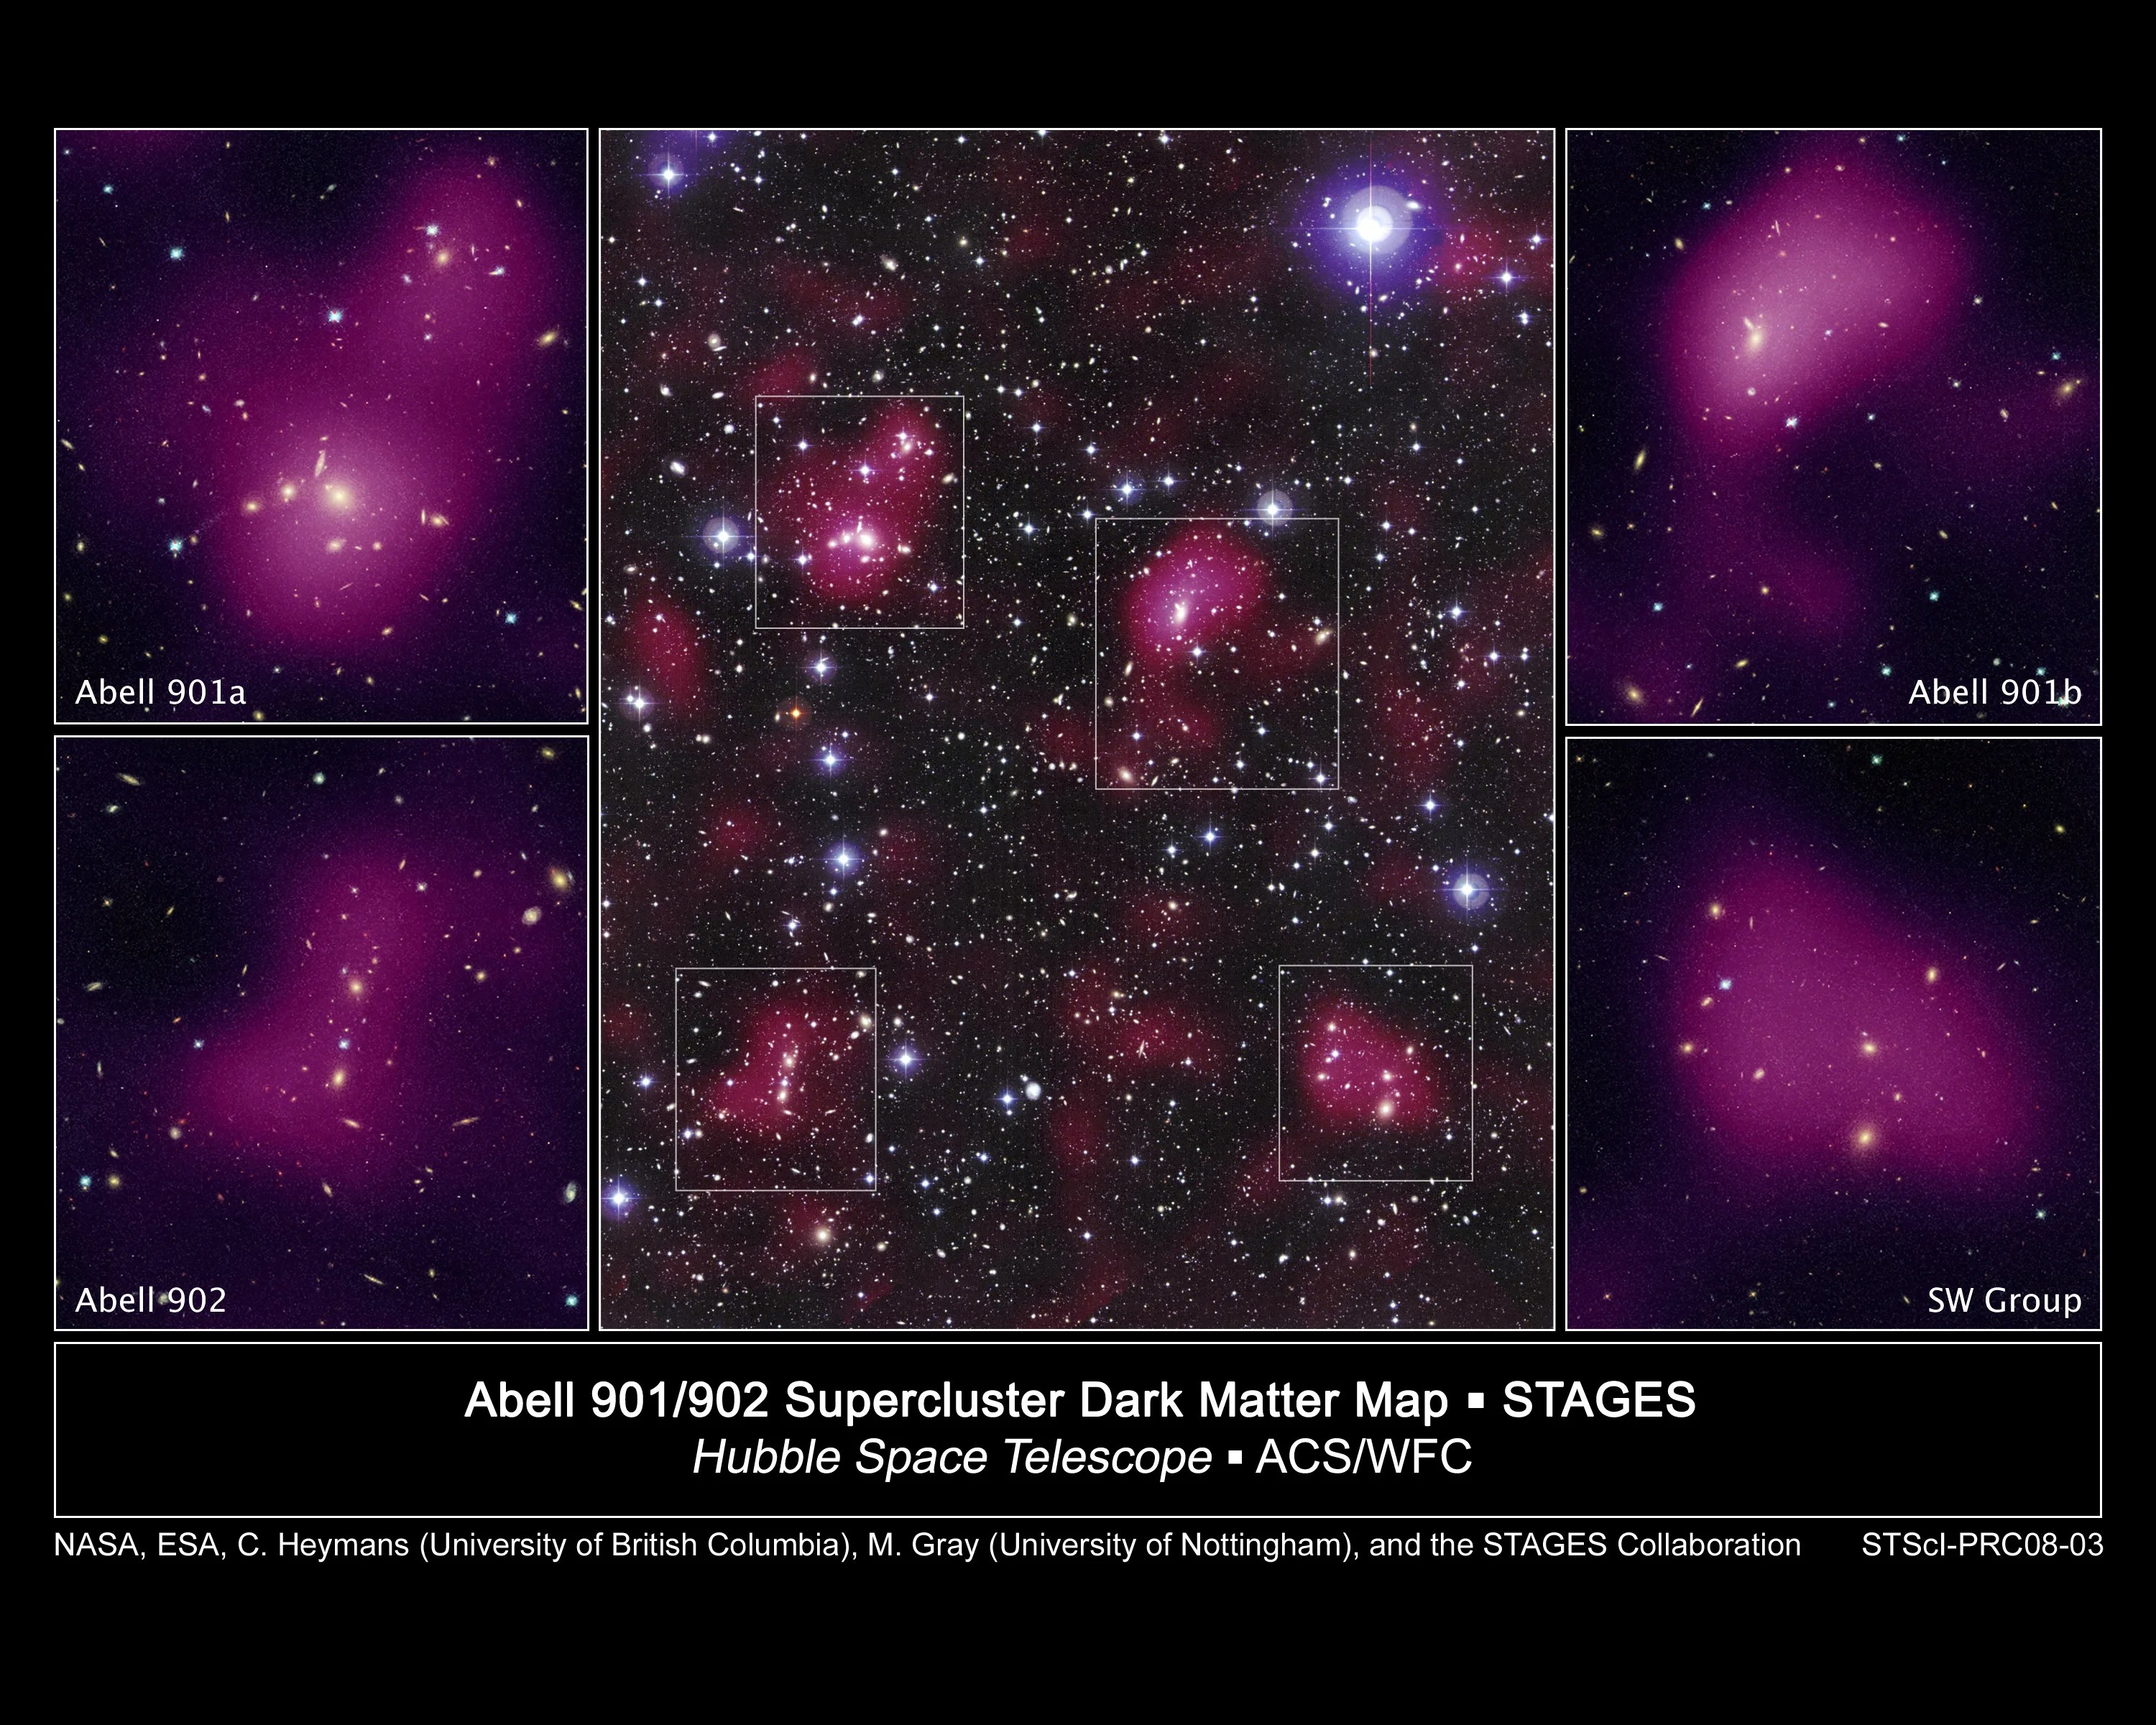 Part of a Hubble image of the supercluster dark matter map